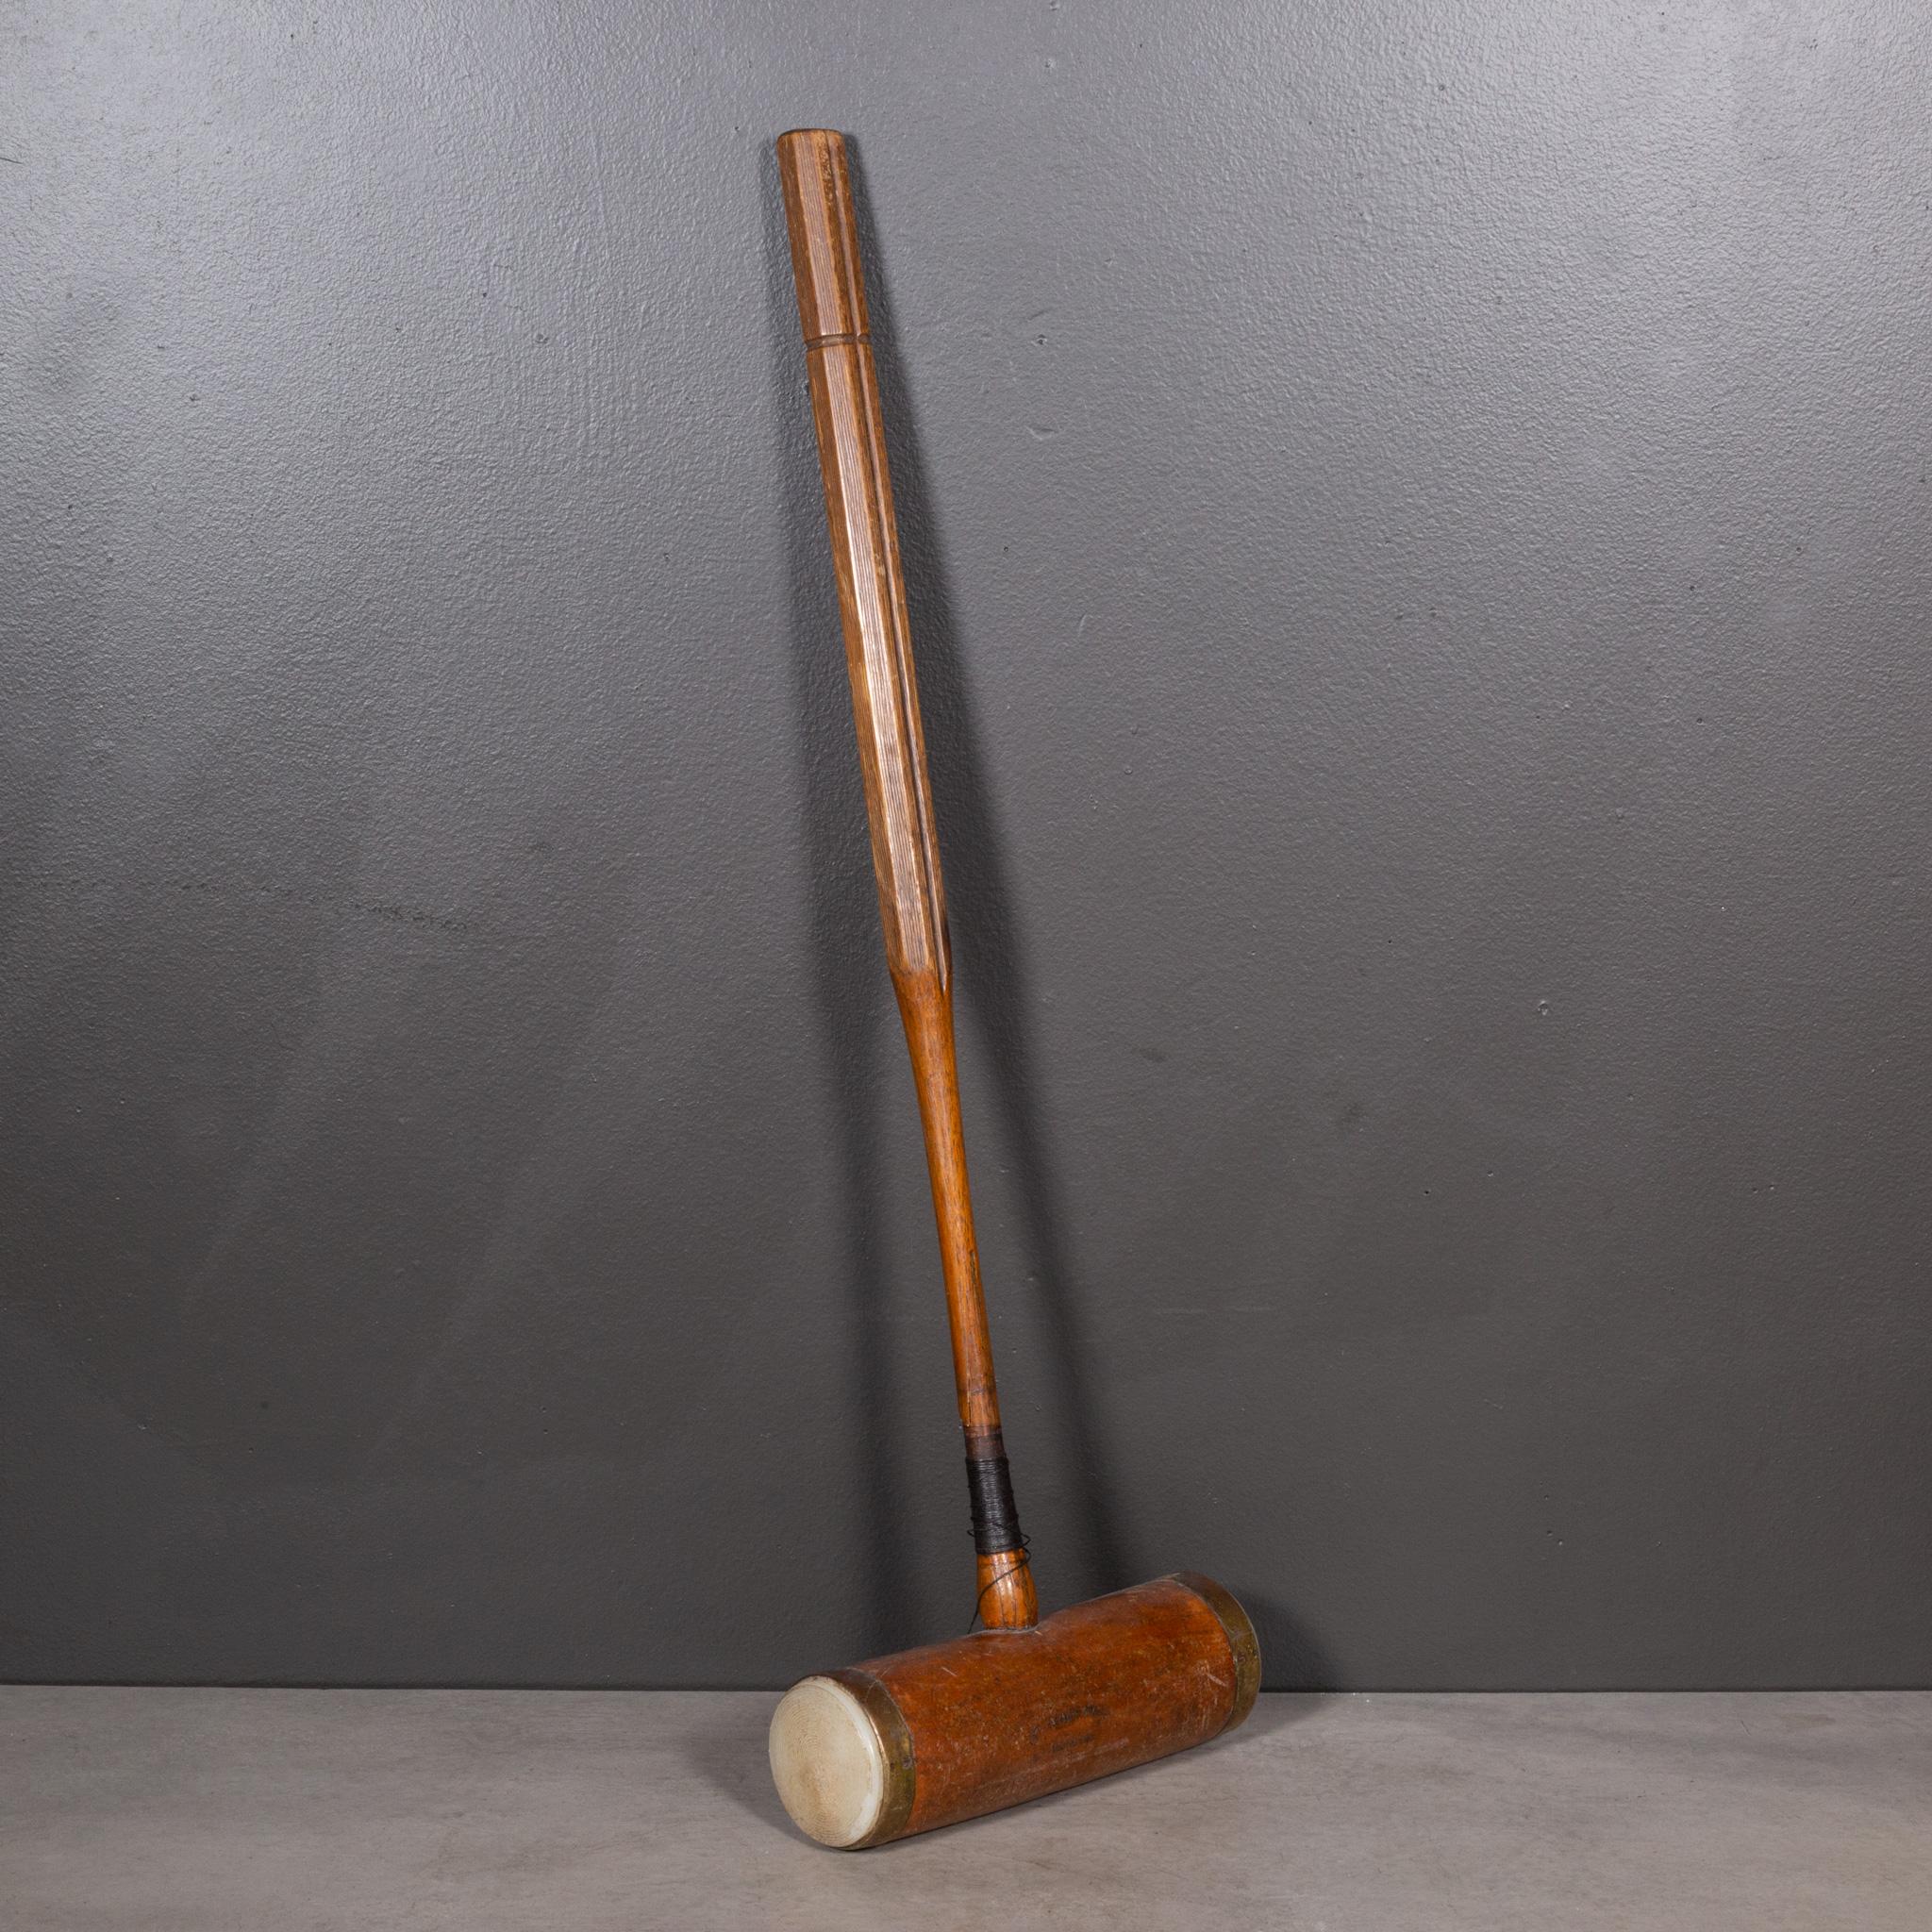 Wood Early 20th c. Engraved Croquet Mallet c.1920